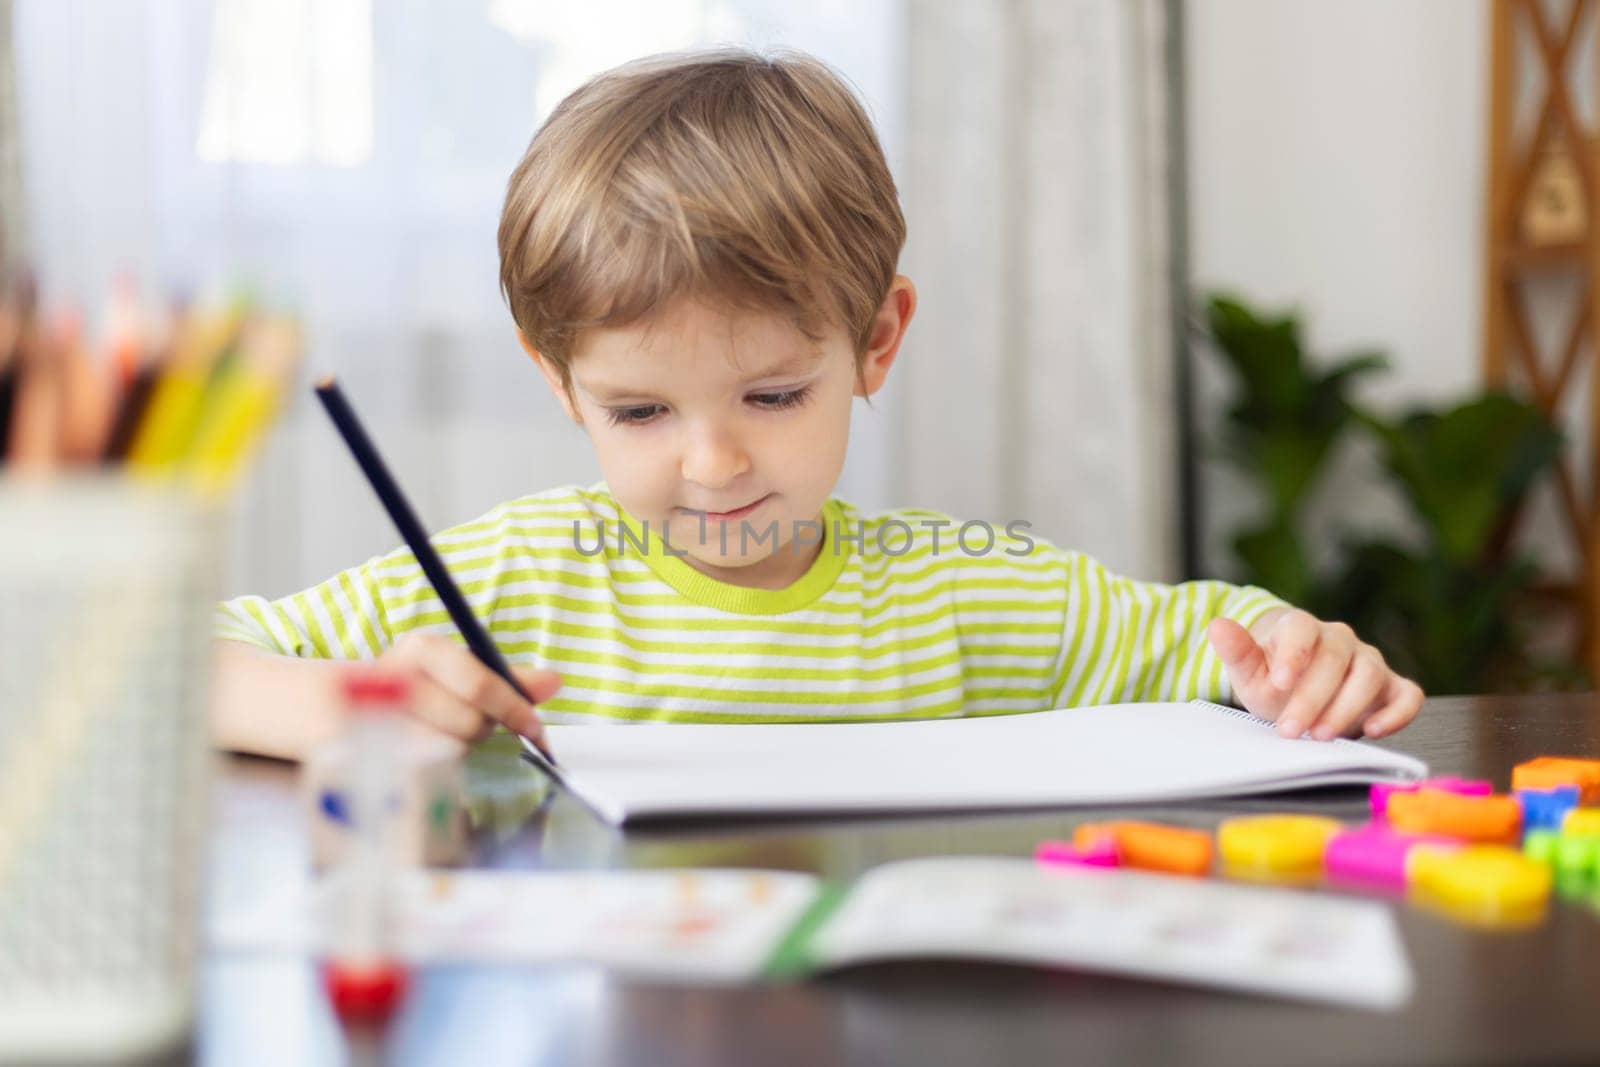 Young Boy Focused on Painting at Home - Creative Childhood Development by andreyz